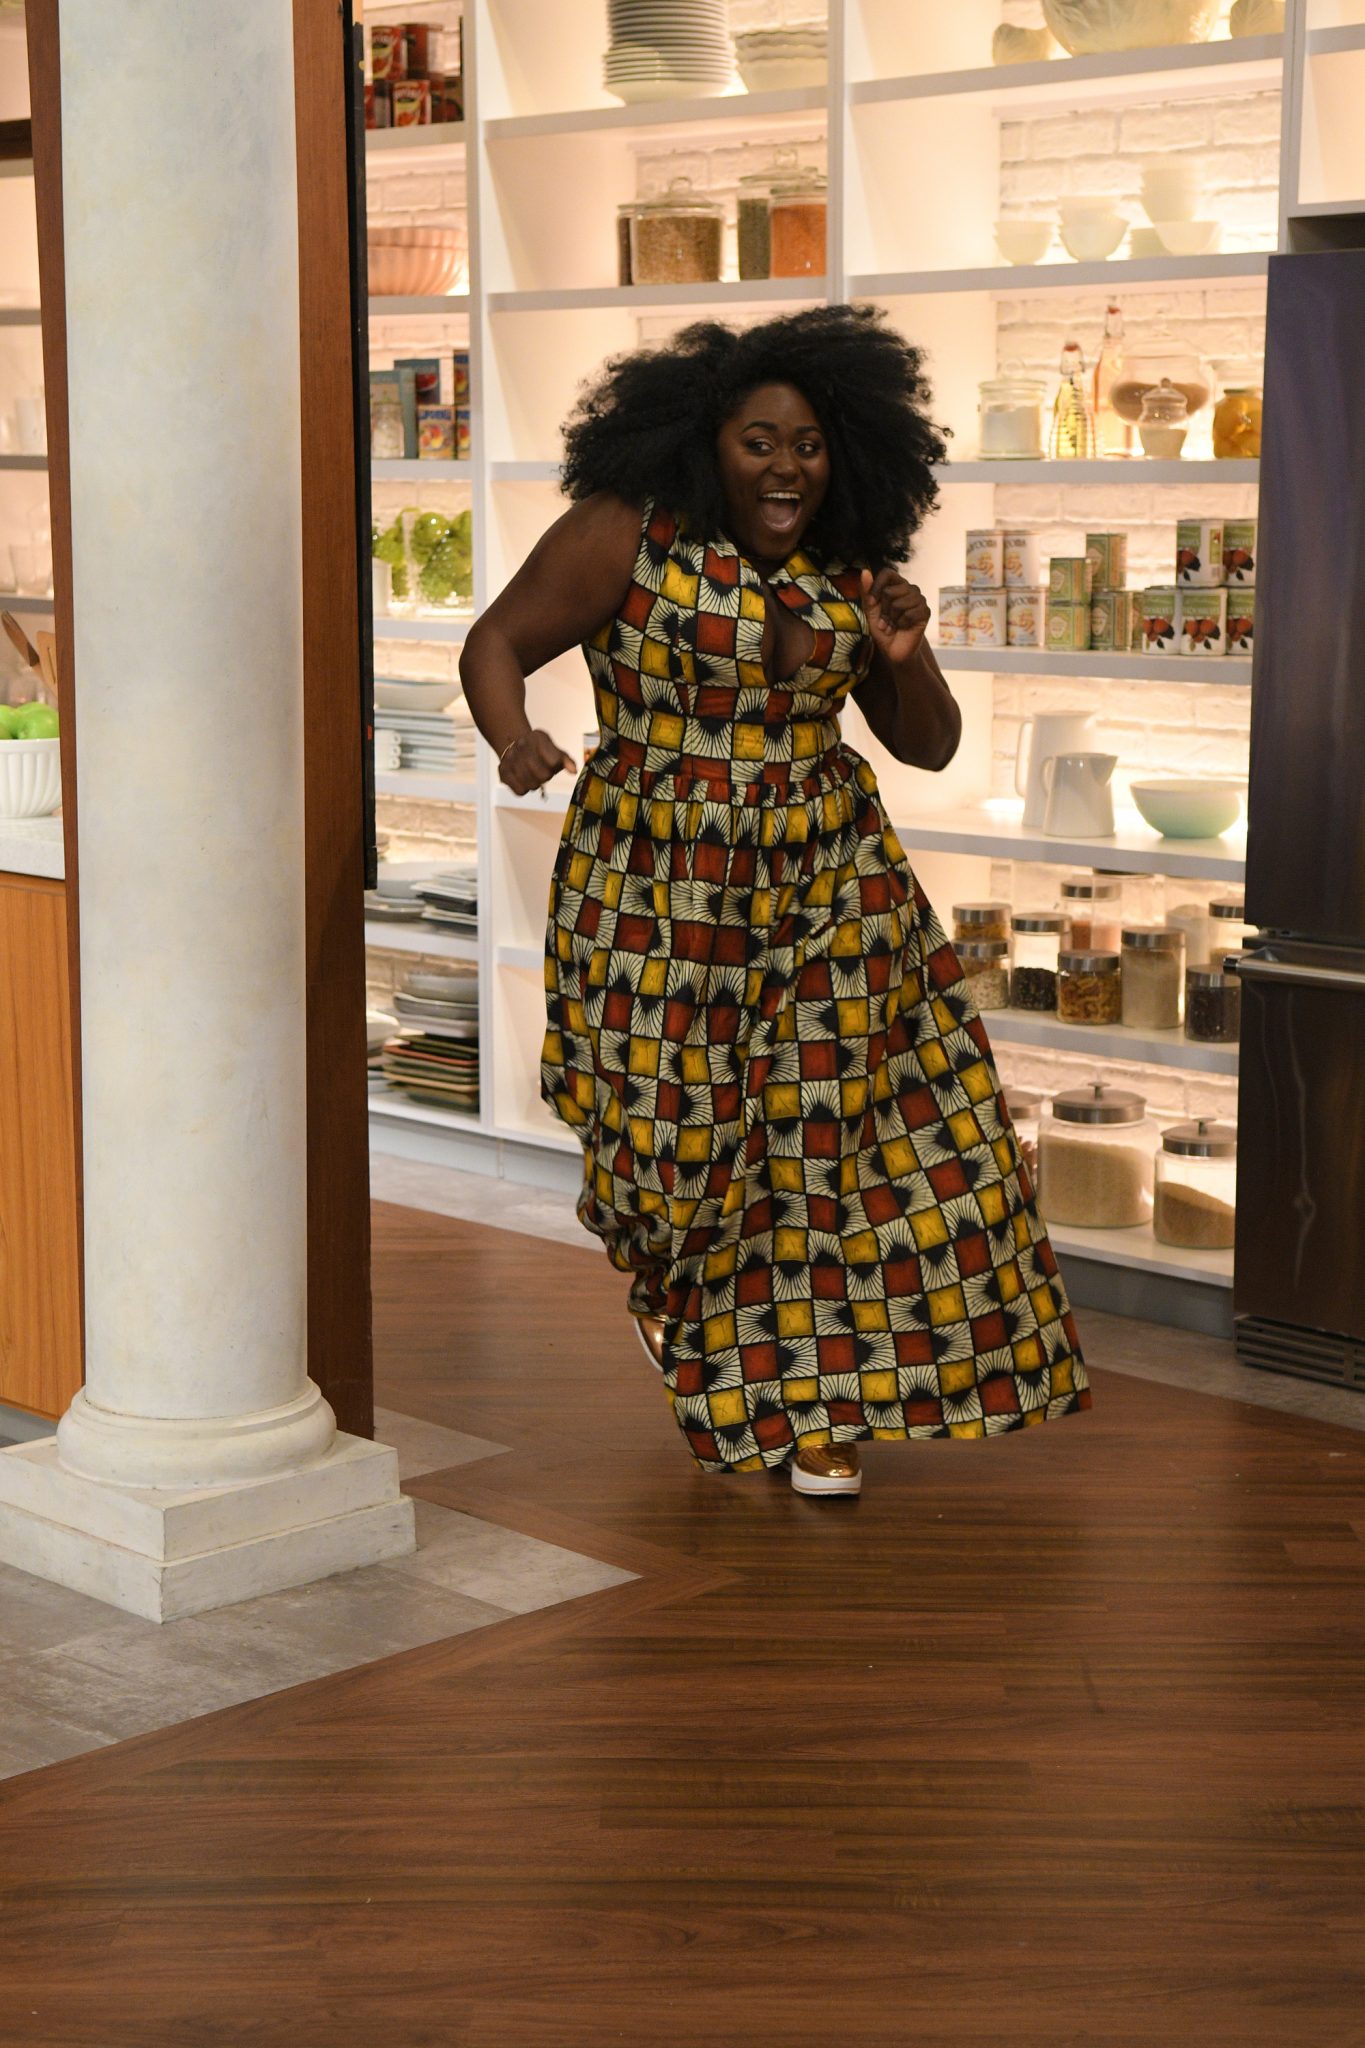 In Case You Missed It: Danielle Brooks On The Chew